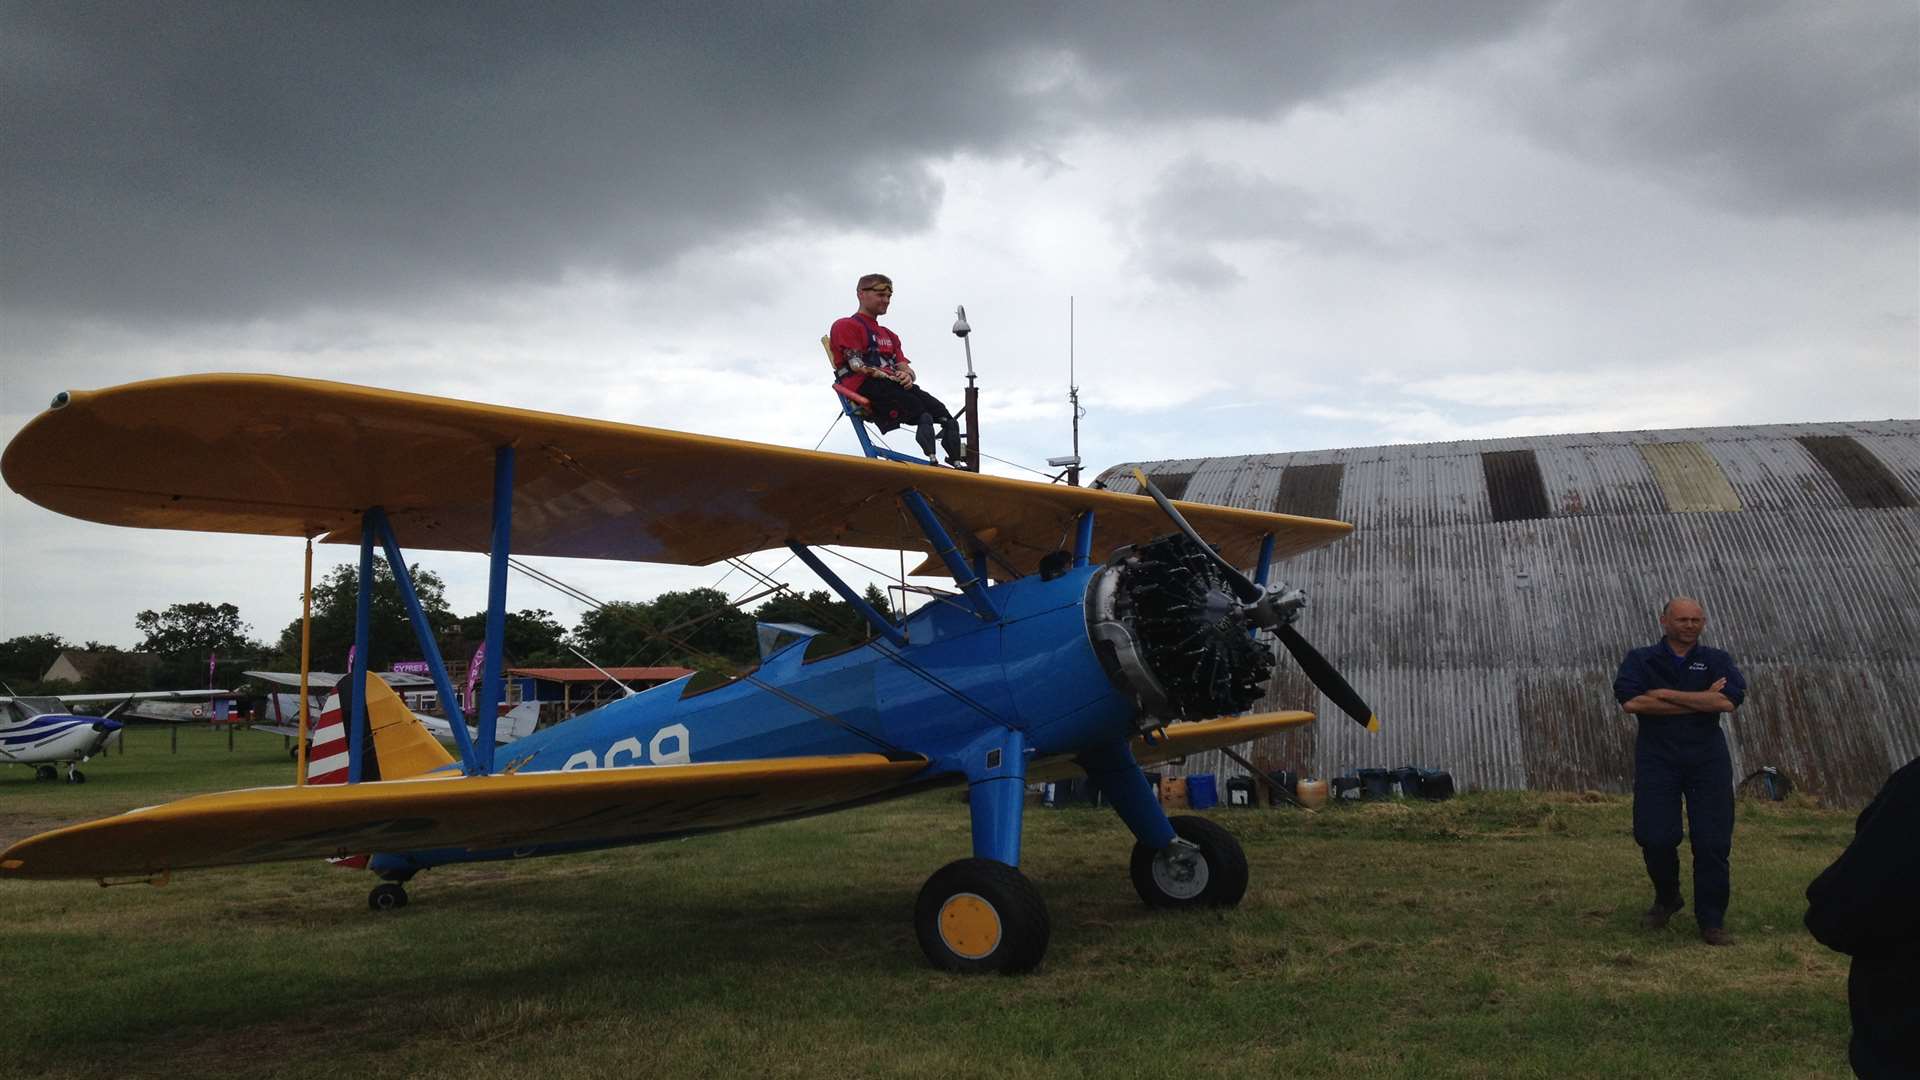 Mark Ormrod lands after his wing walk